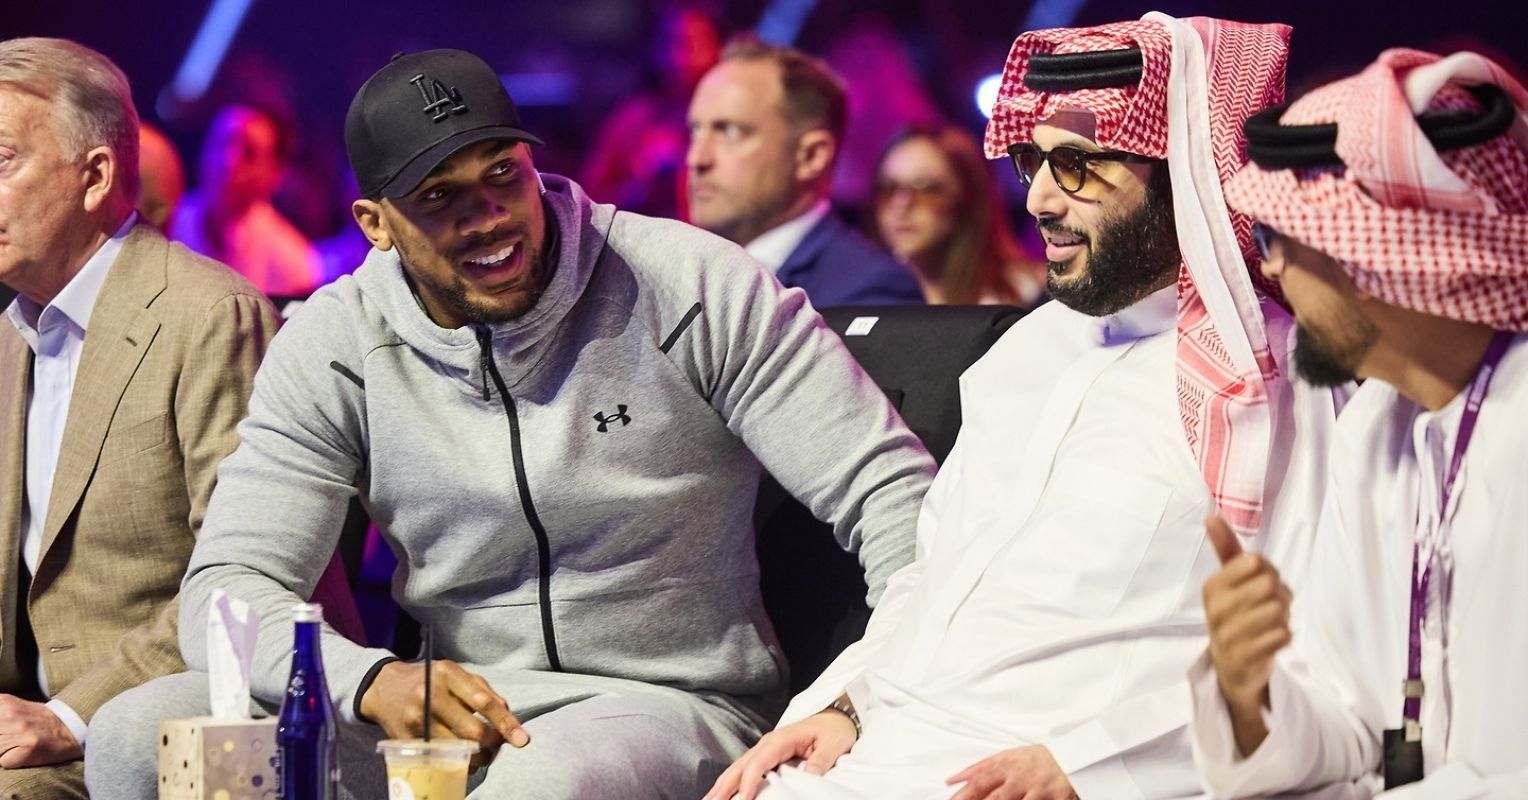 New Super League With World’s Top Stars: Sheikhs Ready To Revolutionize Boxing World